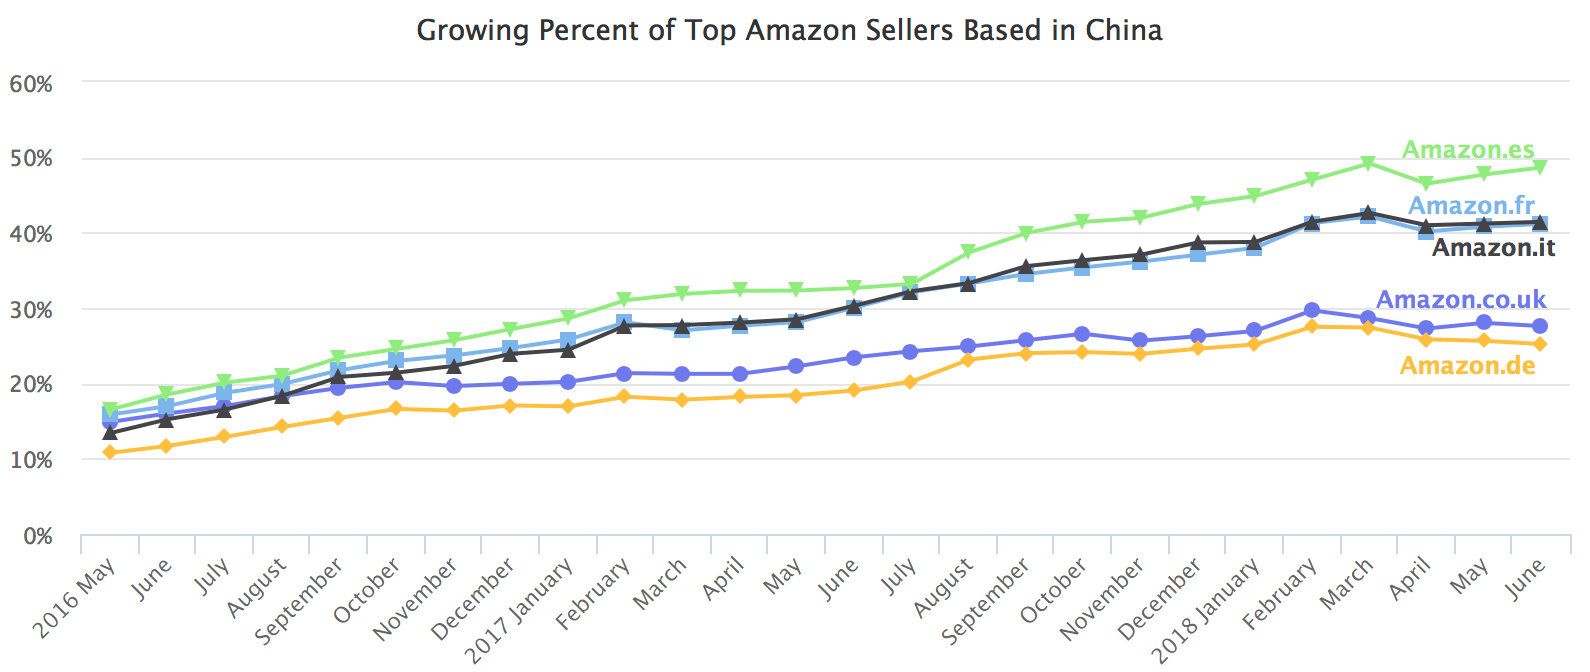 Percent of top Amazon sellers based in China